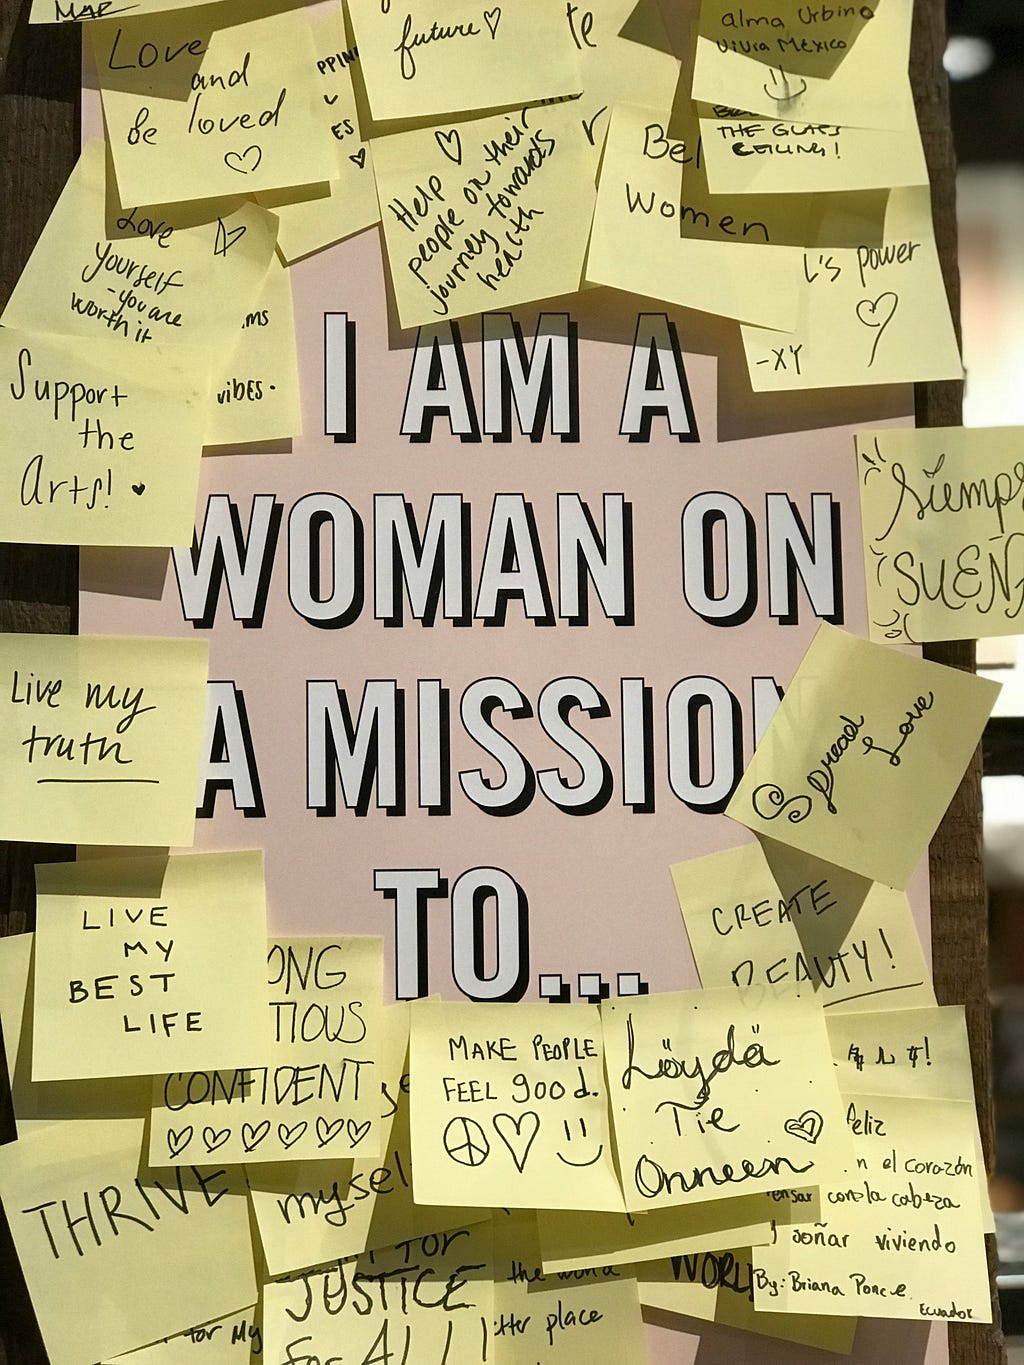 A photo showing the inscription I am a woman on a mission to… and many short stickers showing the possibilities